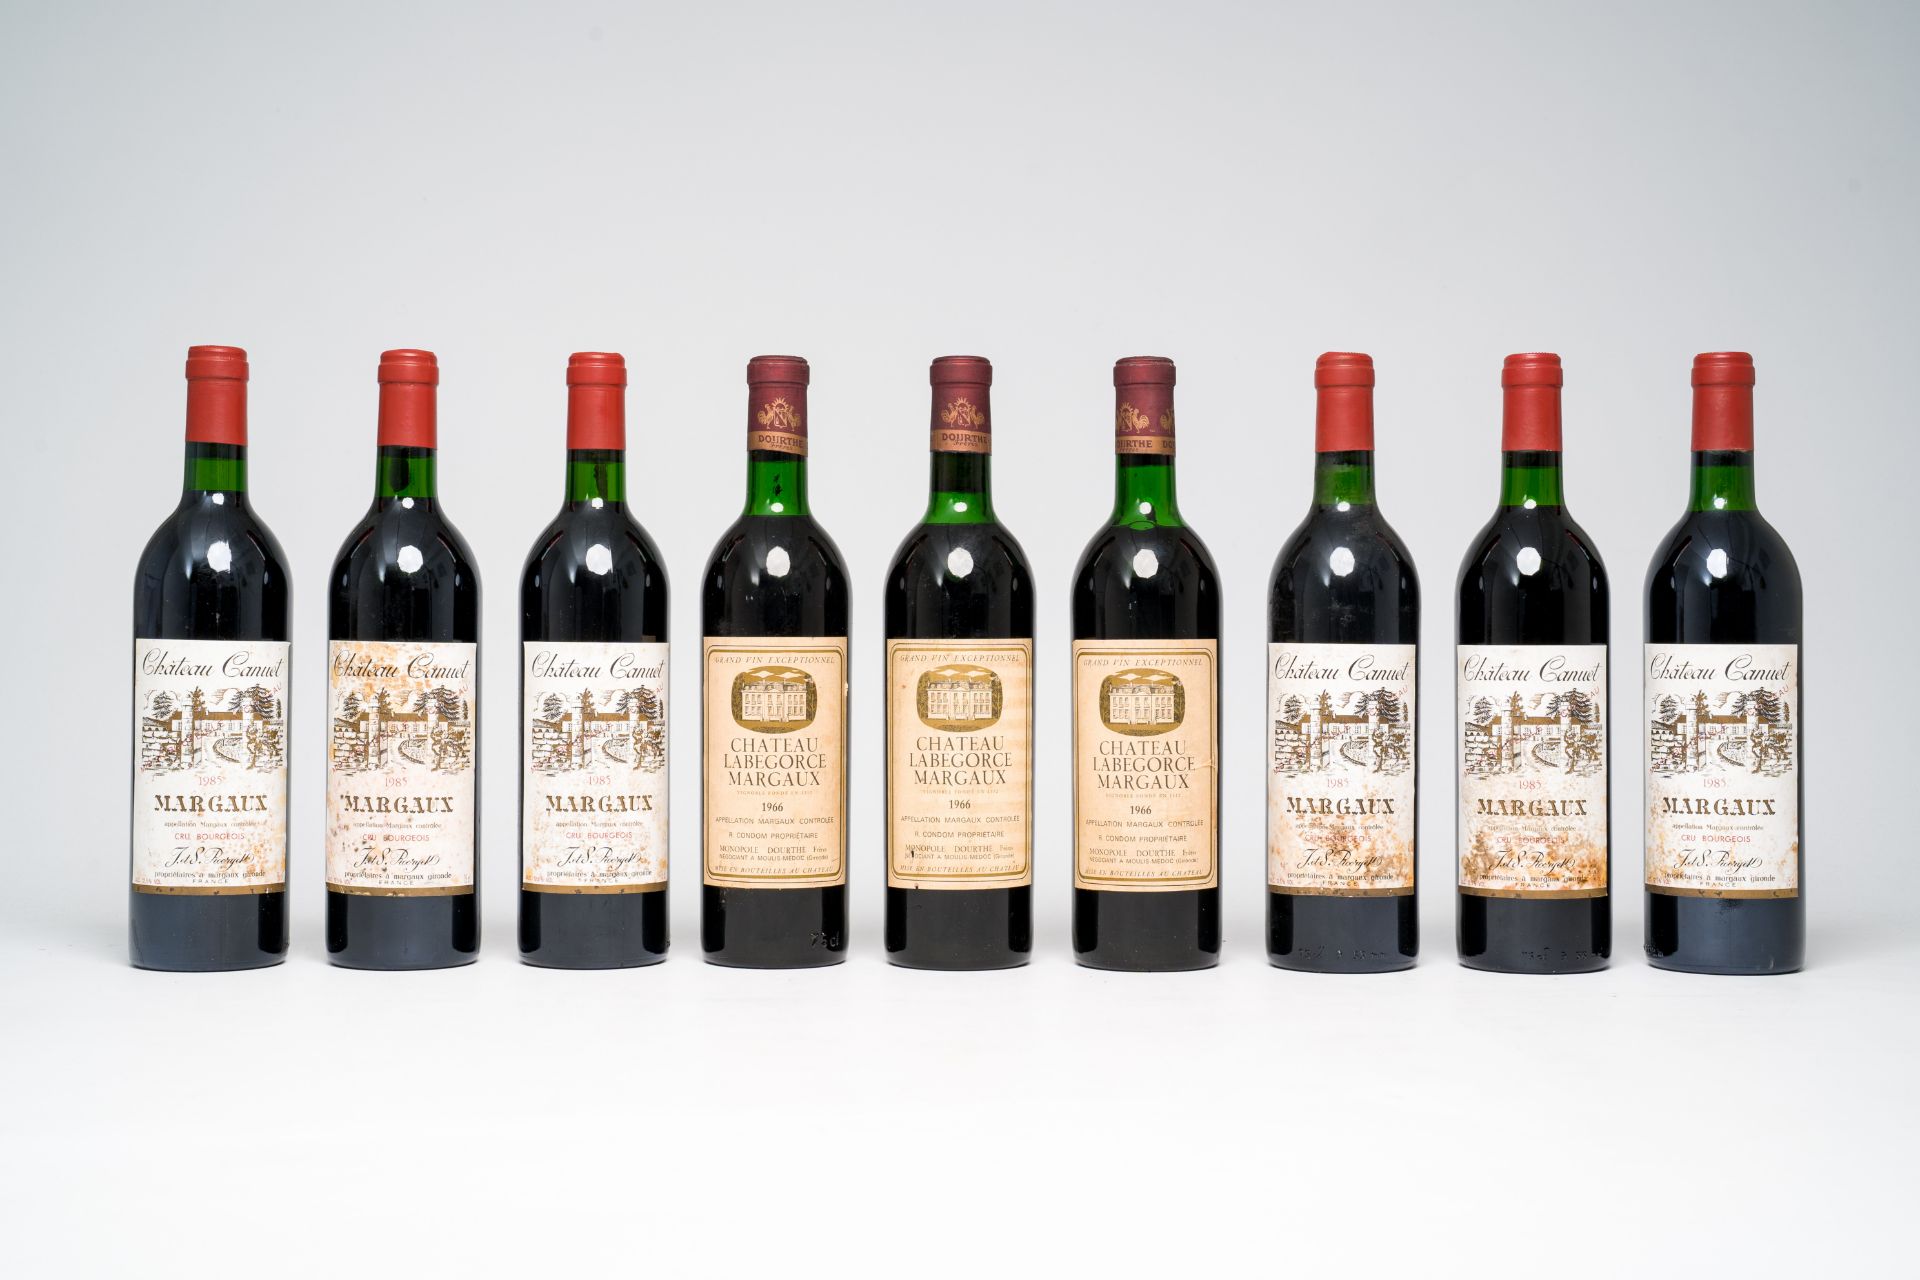 Three bottles of Chateau Labegorce and six bottles of Chateau Canuet, Margaux, 1966 and 1985